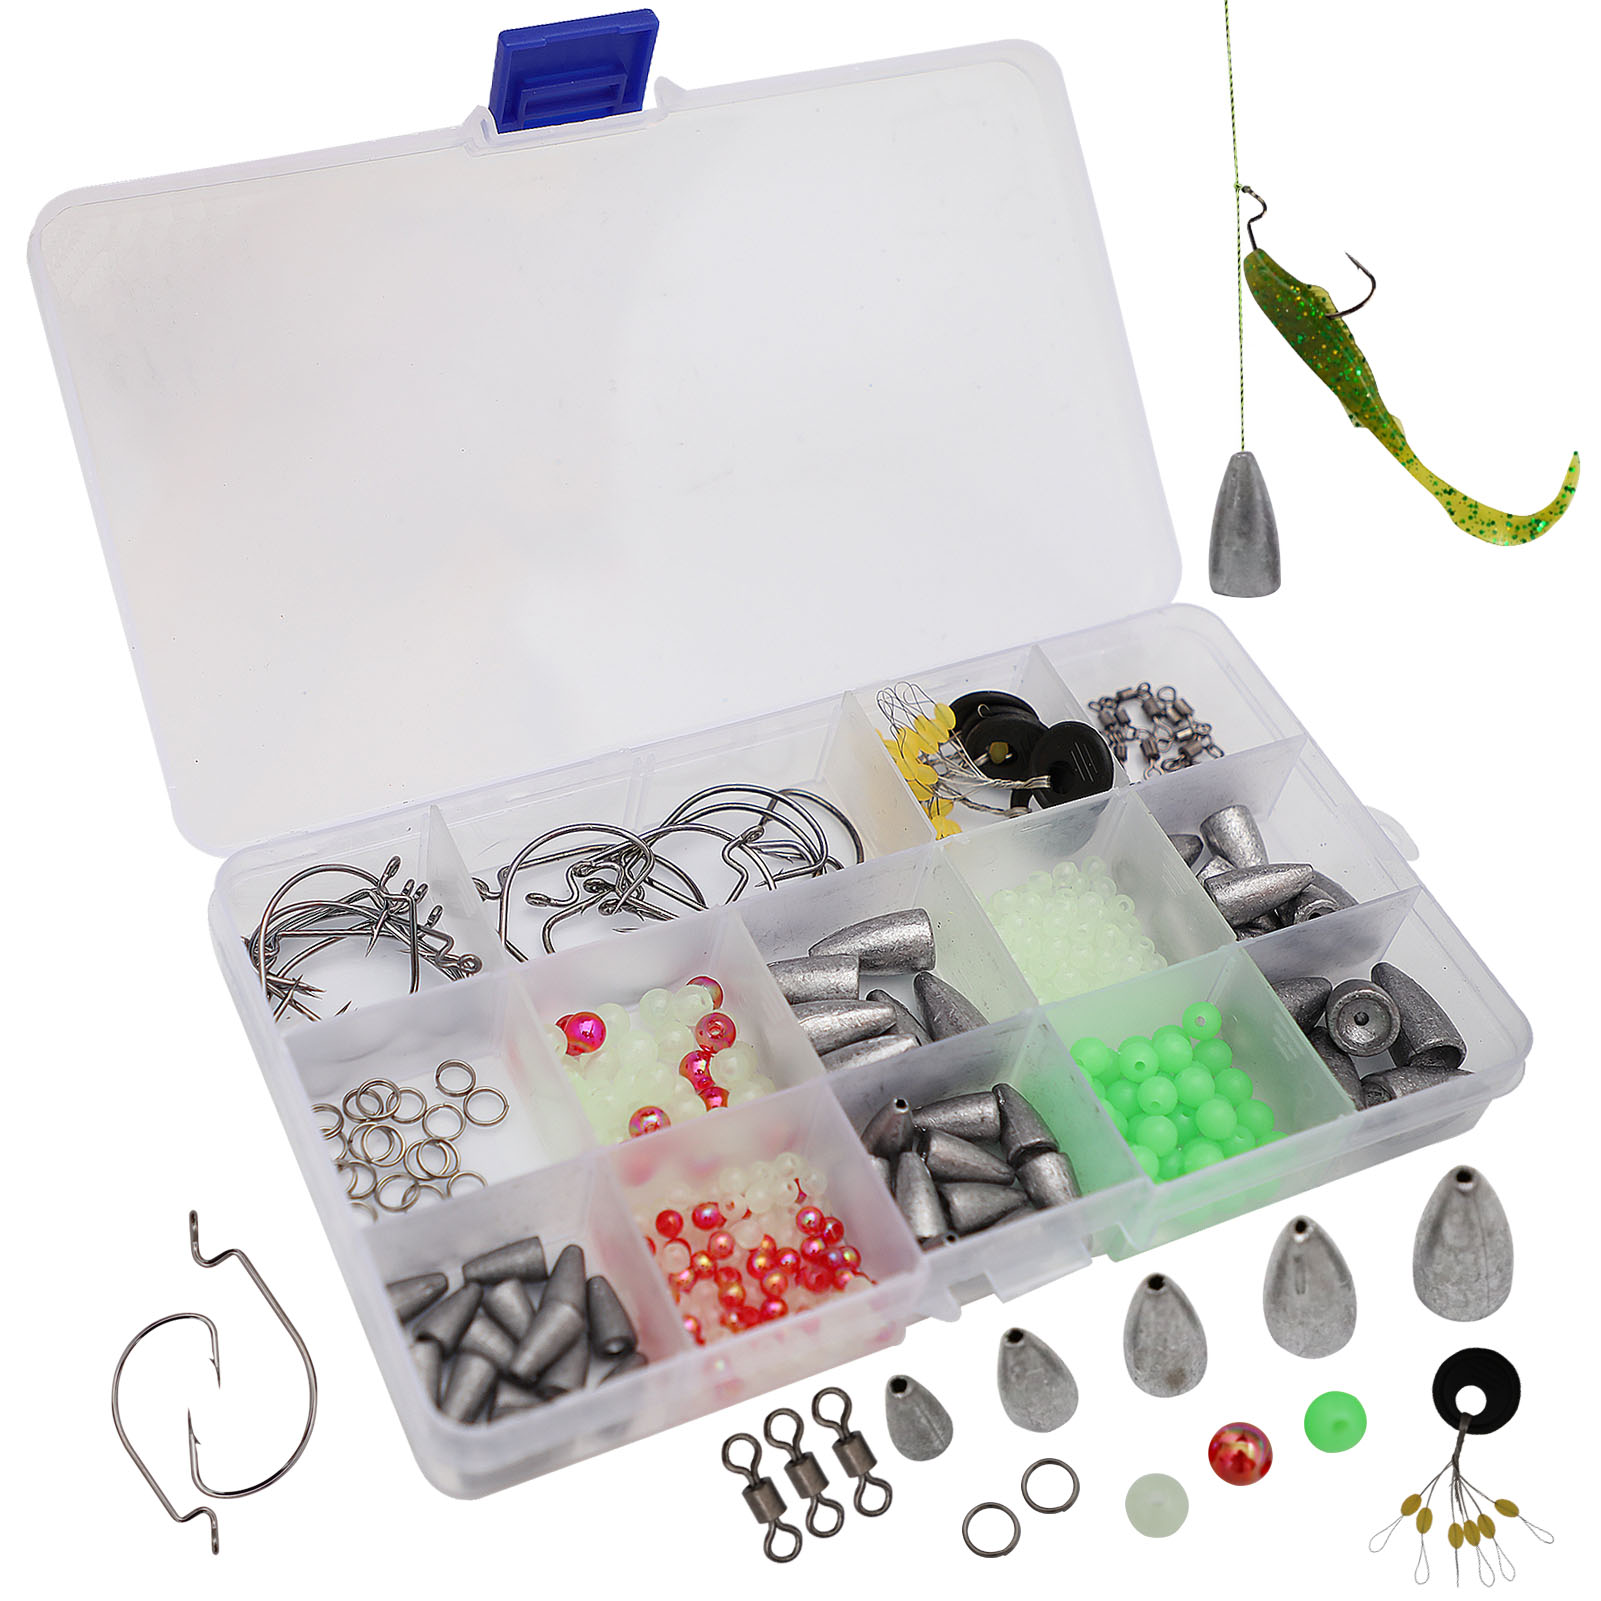 FREE FISHER 185/145pcs Fishing Weights Set Bullet Lead Sinkers Rotating Swivels Crank Hooks Luminous Beads with Clear Box for Bass/Car